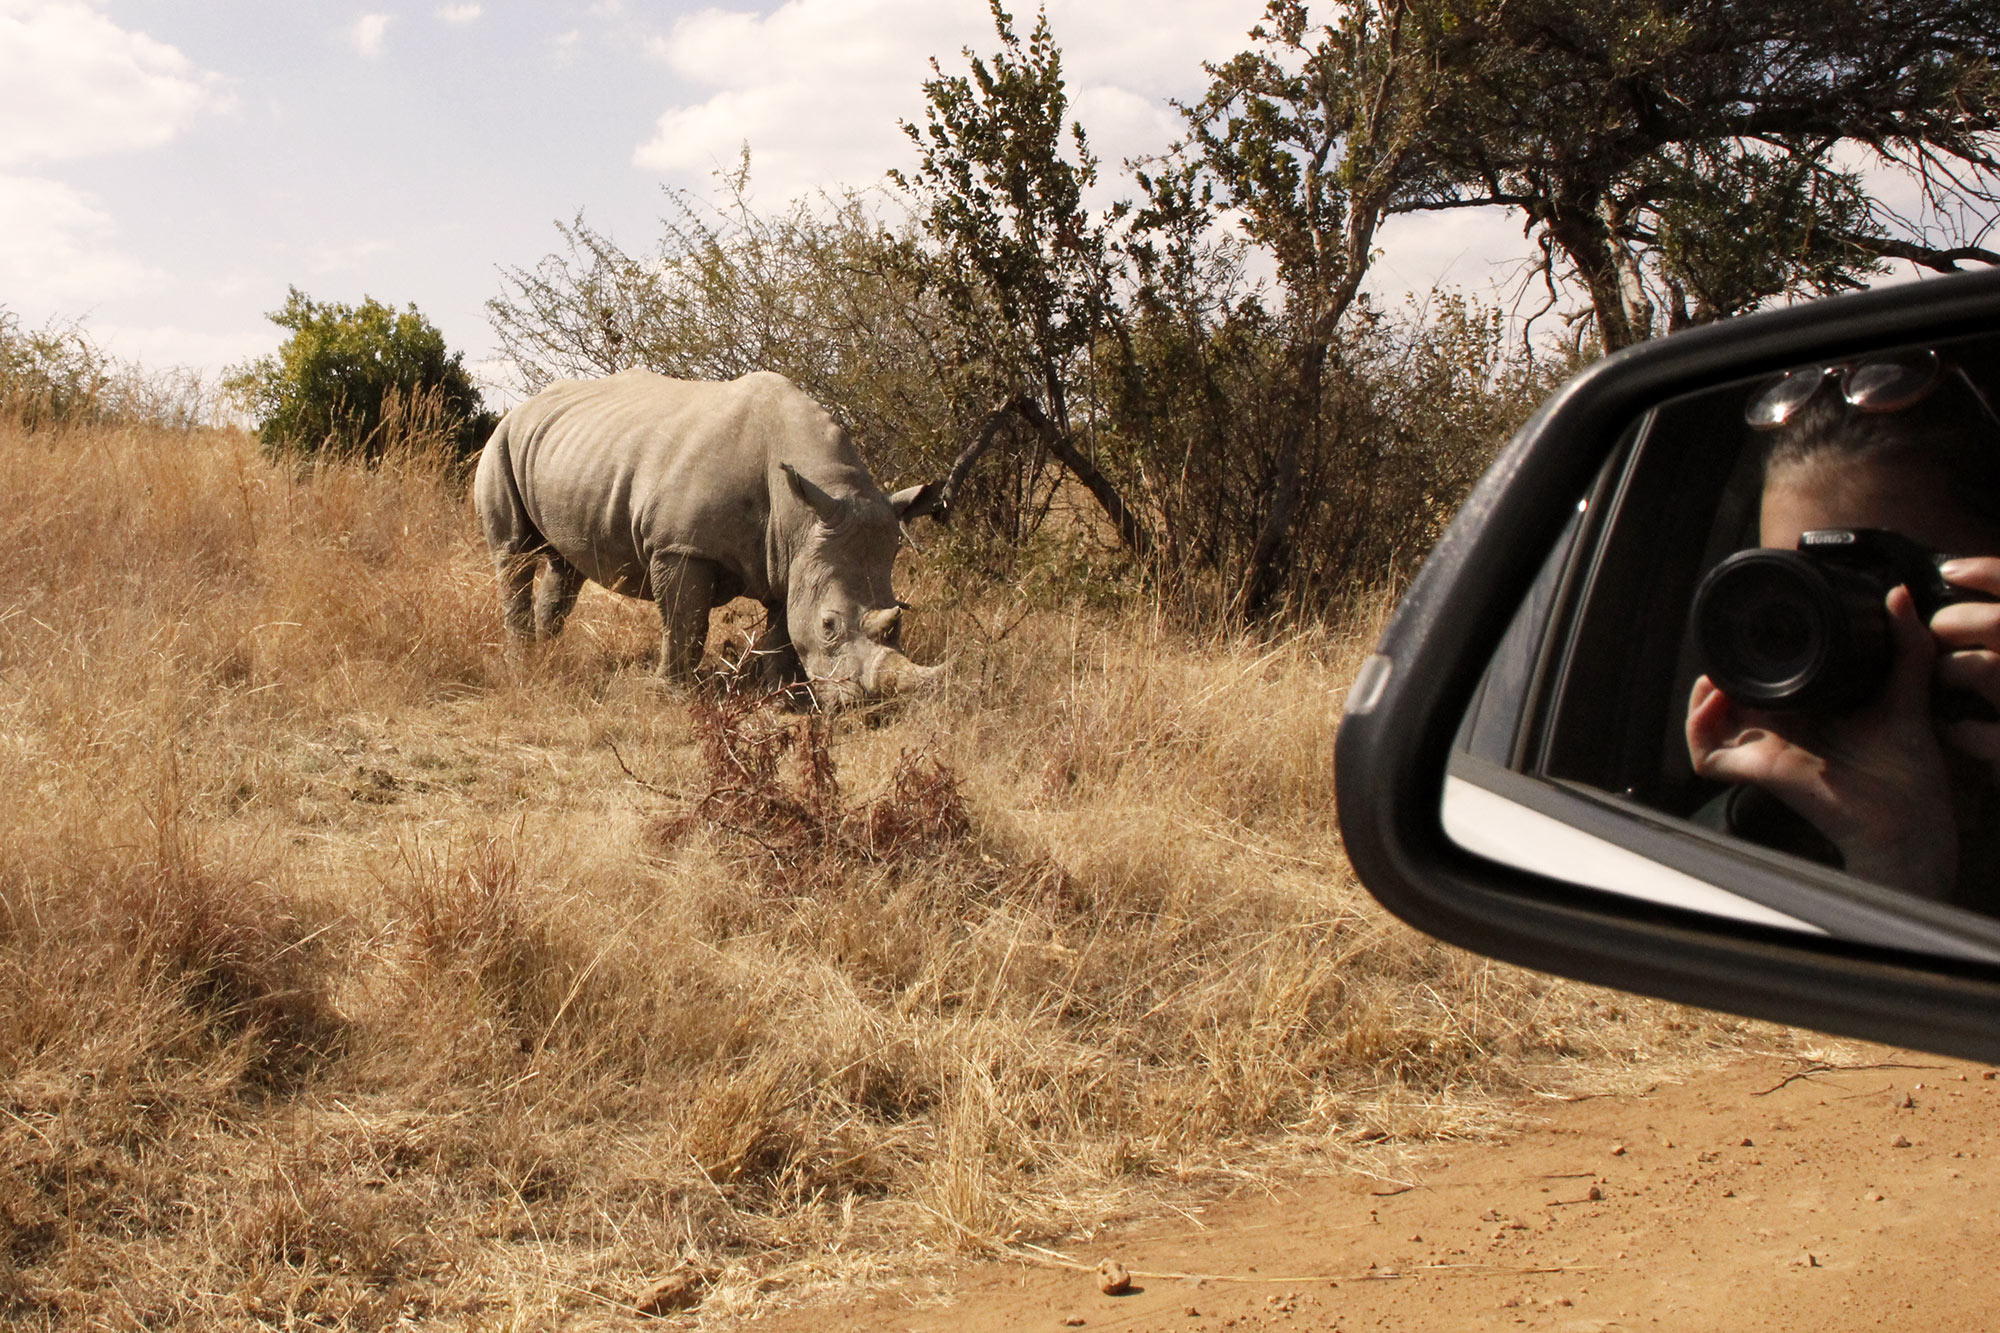 A Rhino in the landscape and dorie reflects in the mirror of the car